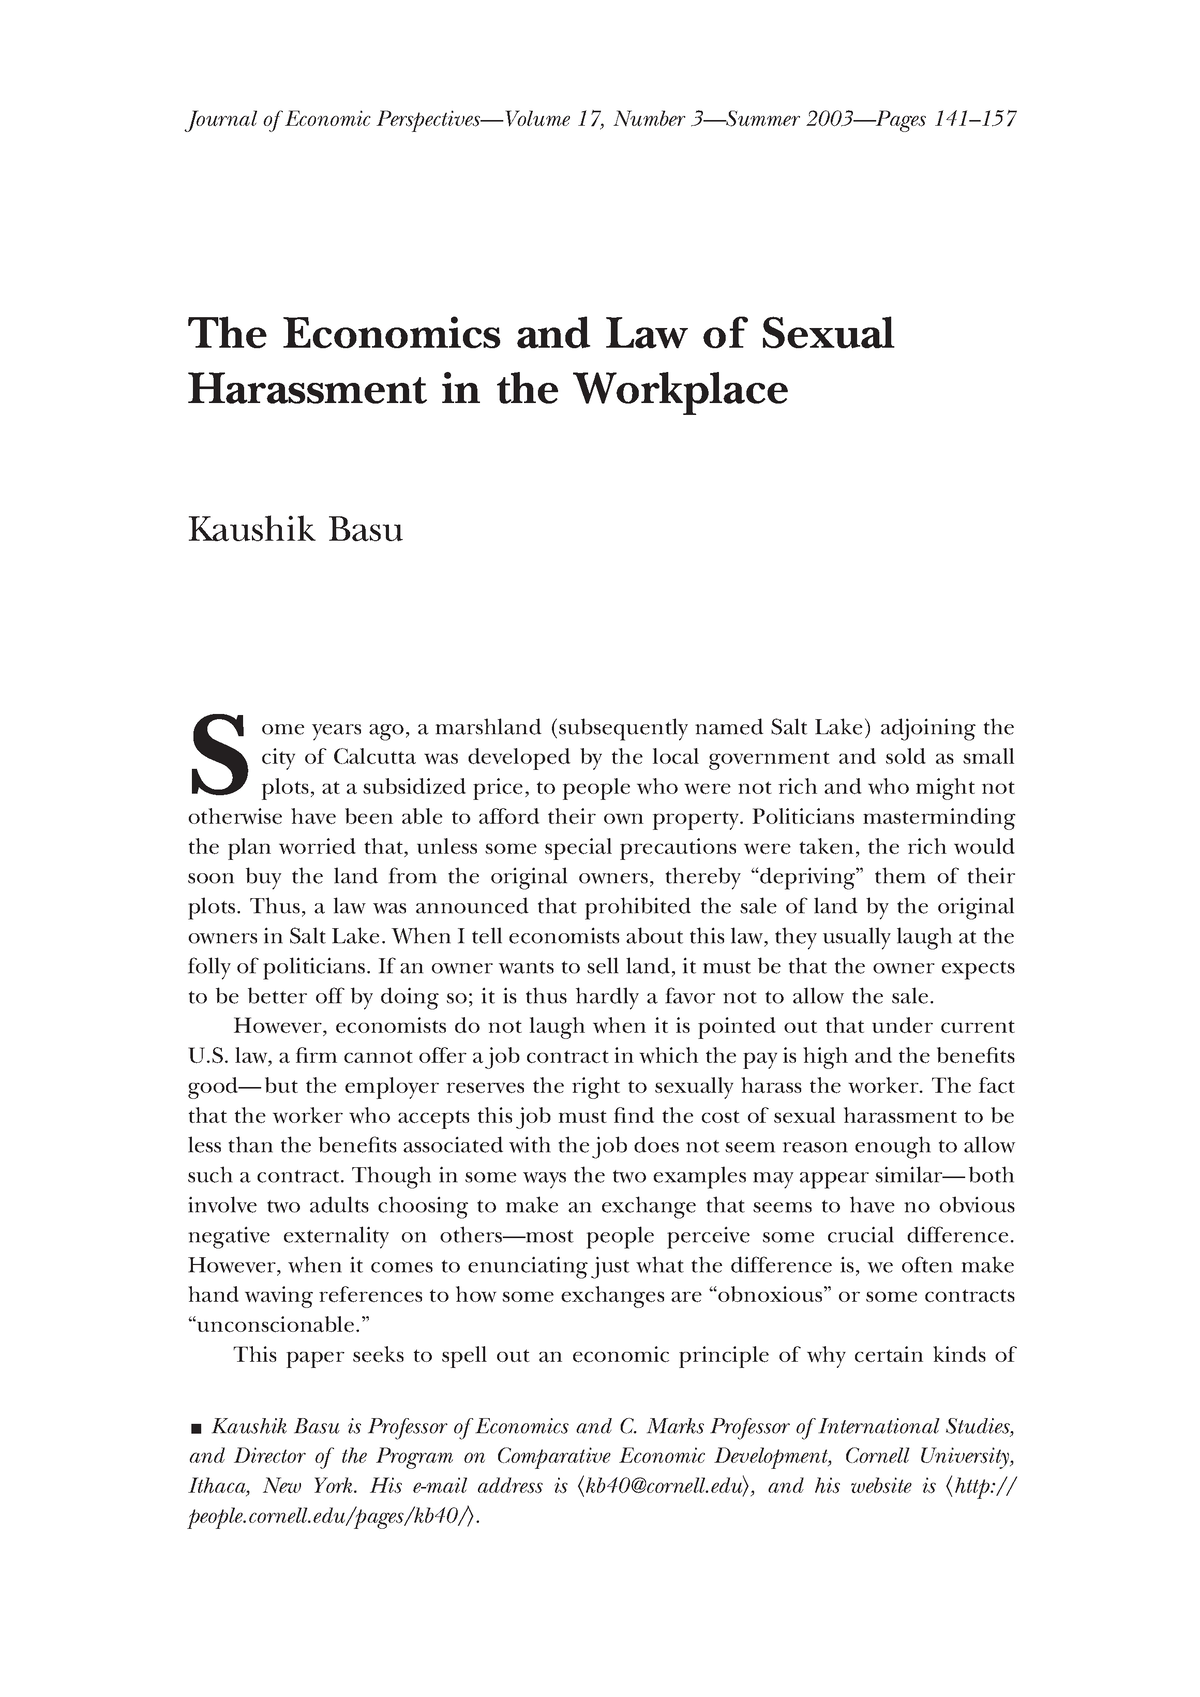 Research Paper In Sexual Harrassment The Economics And Law Of Sexual Harassment In The 4022